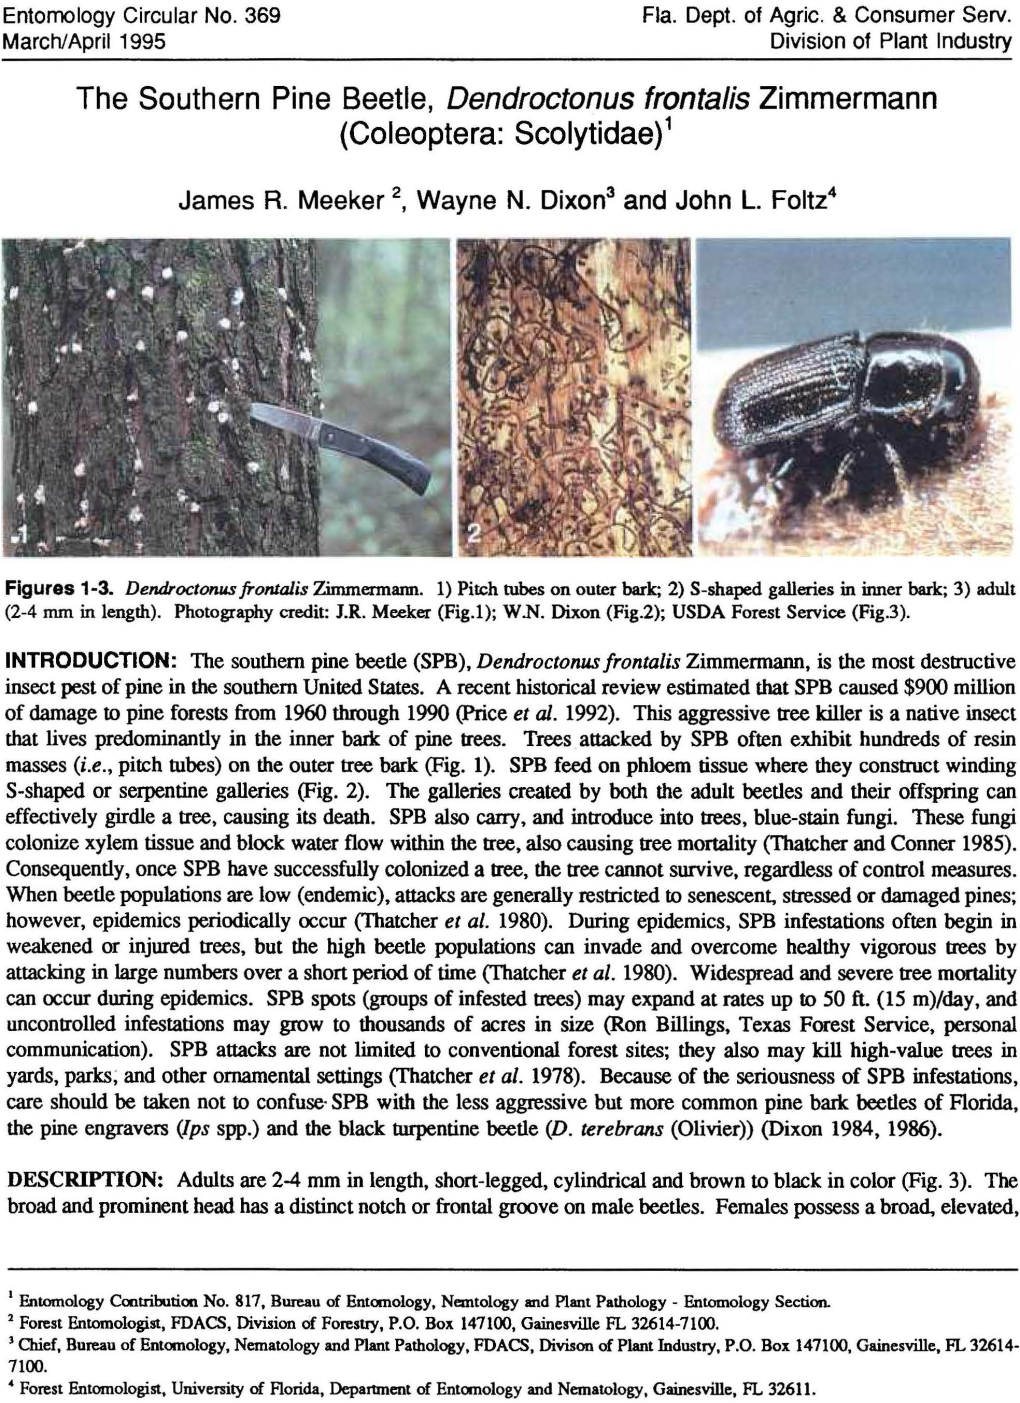 Southern Pine Beetle (SPB), Dendroctonus Frontalis Zimmermann, Is the Most Destructive Insect Pest of Pine in the Southern United States